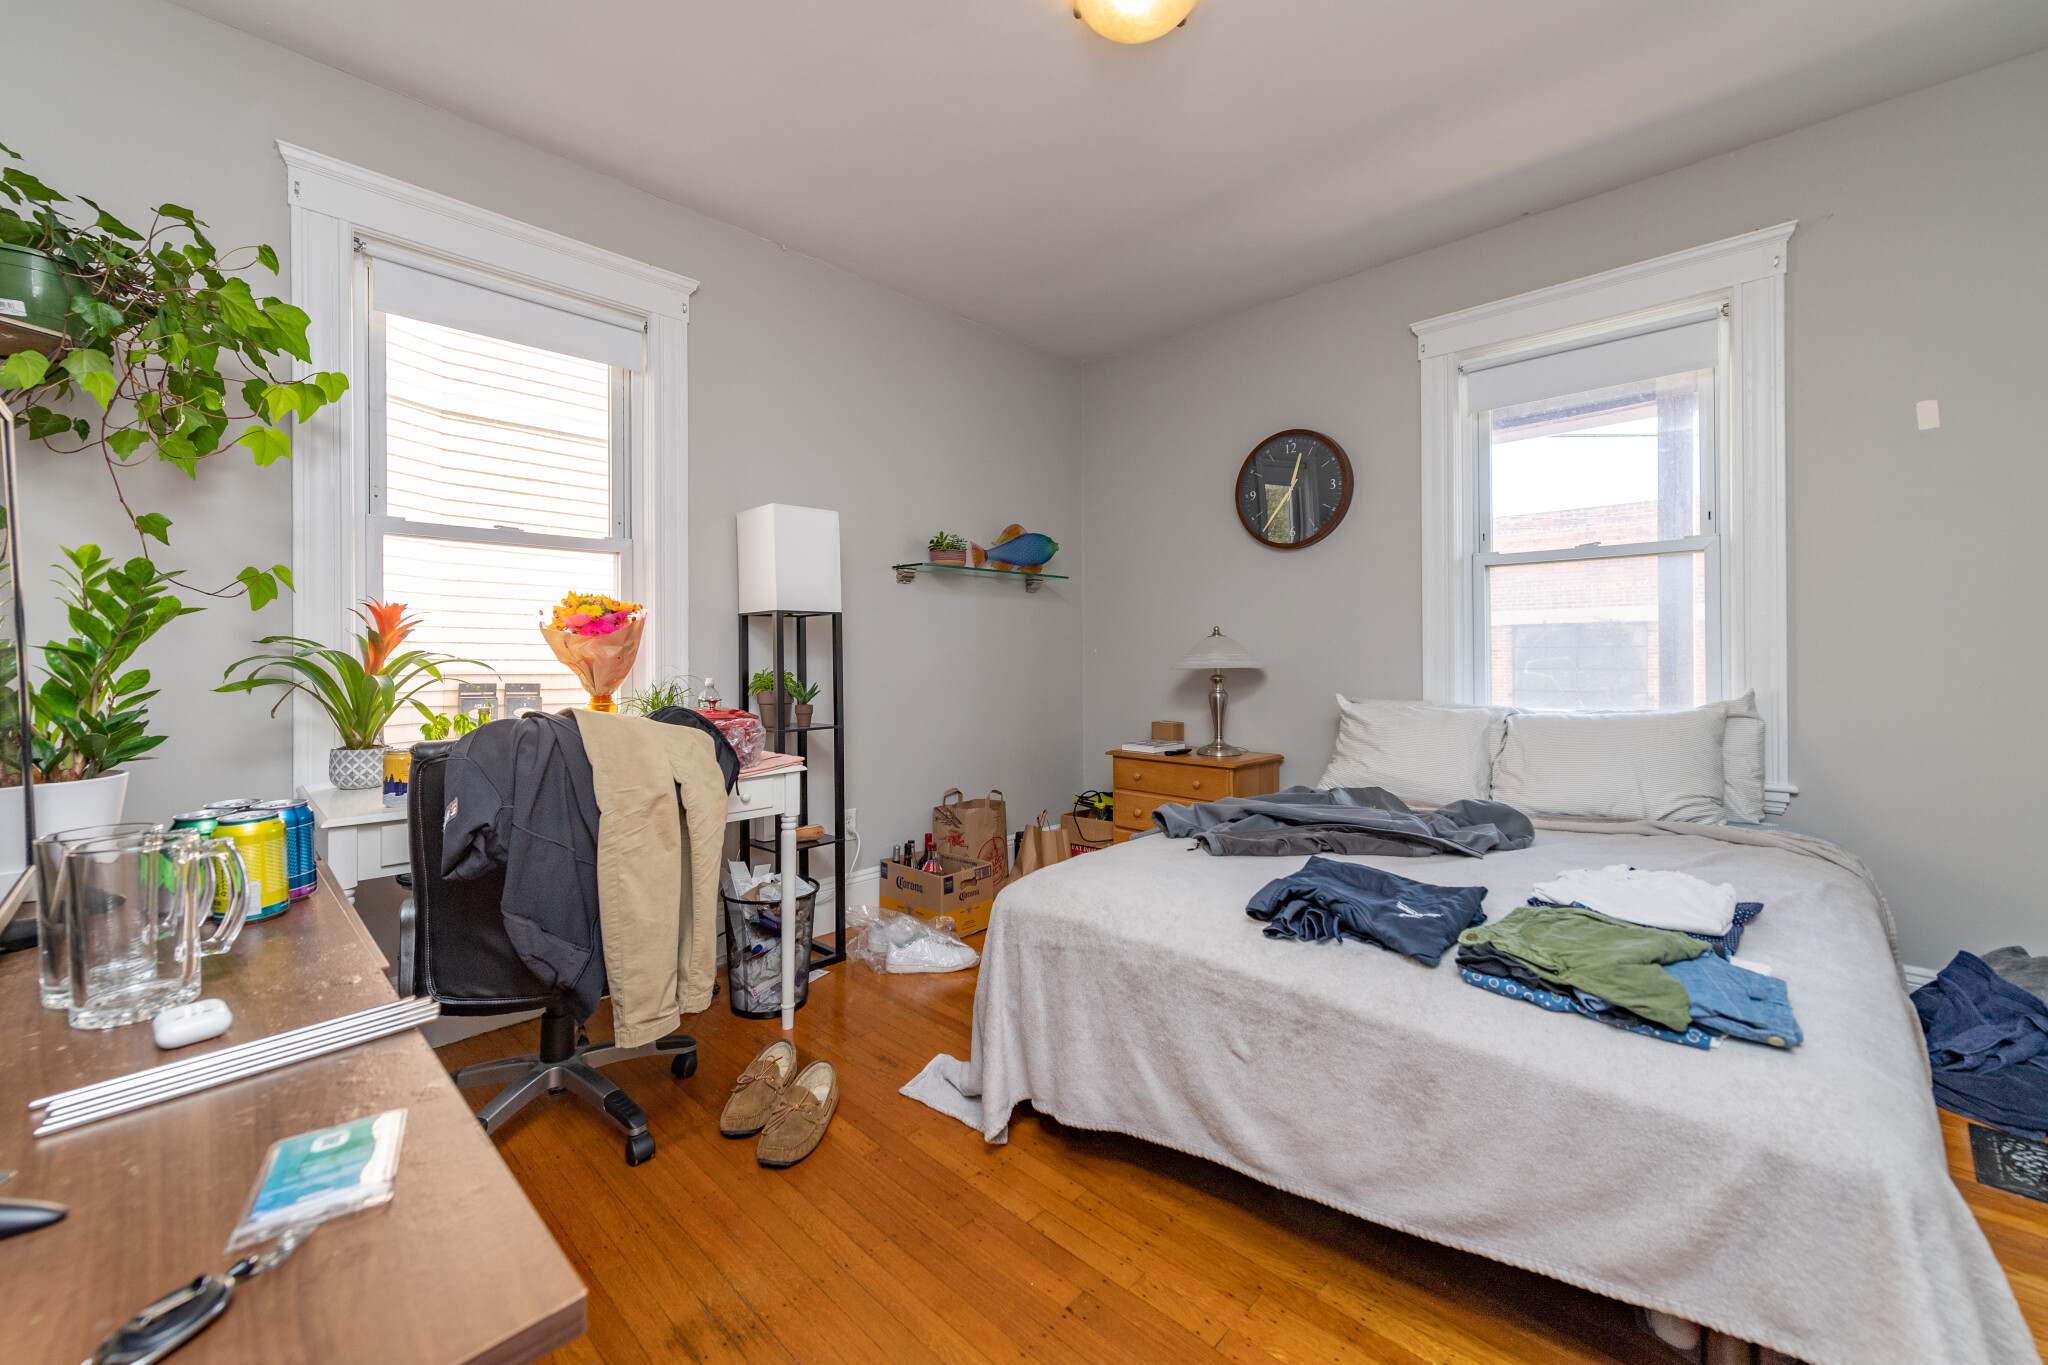 Photos of apartment on Belmont St (s),Somerville MA 02143